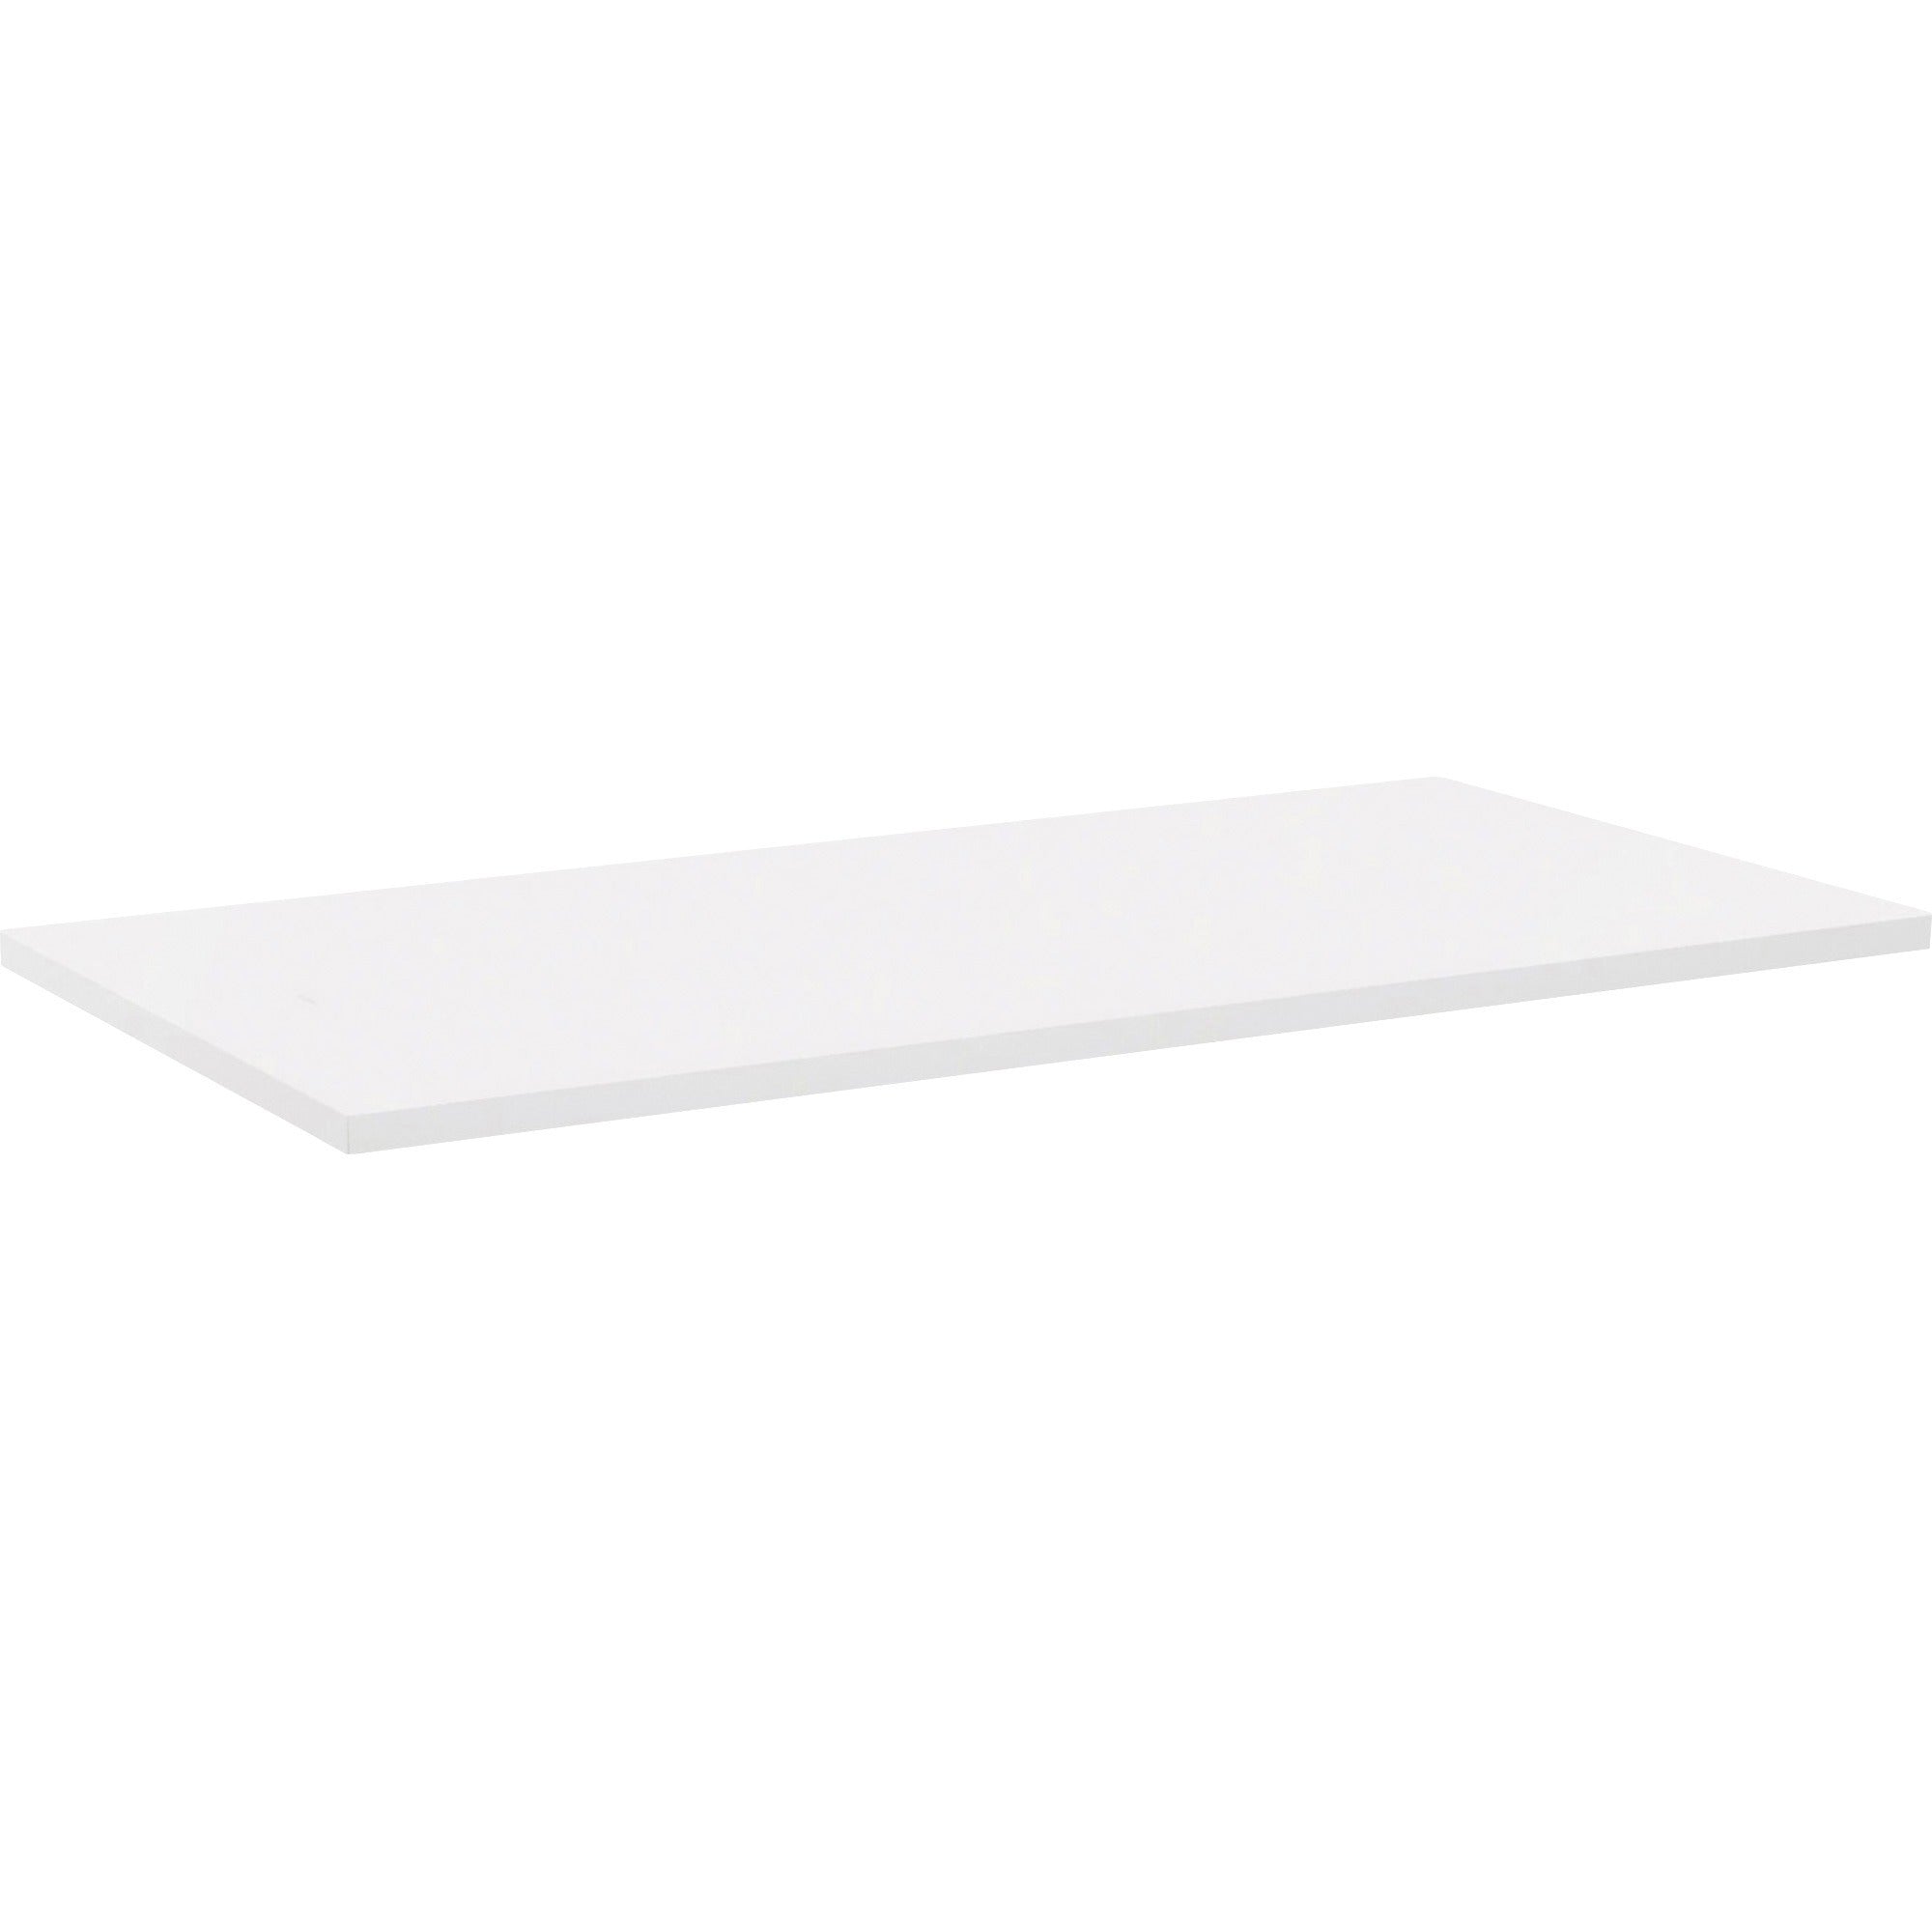 special-t-kingston-72w-table-laminate-tabletop-for-table-topwhite-rectangle-low-pressure-laminate-lpl-top-72-table-top-length-x-24-table-top-width-x-1-table-top-thickness-1-each_sctsp2472wht - 1